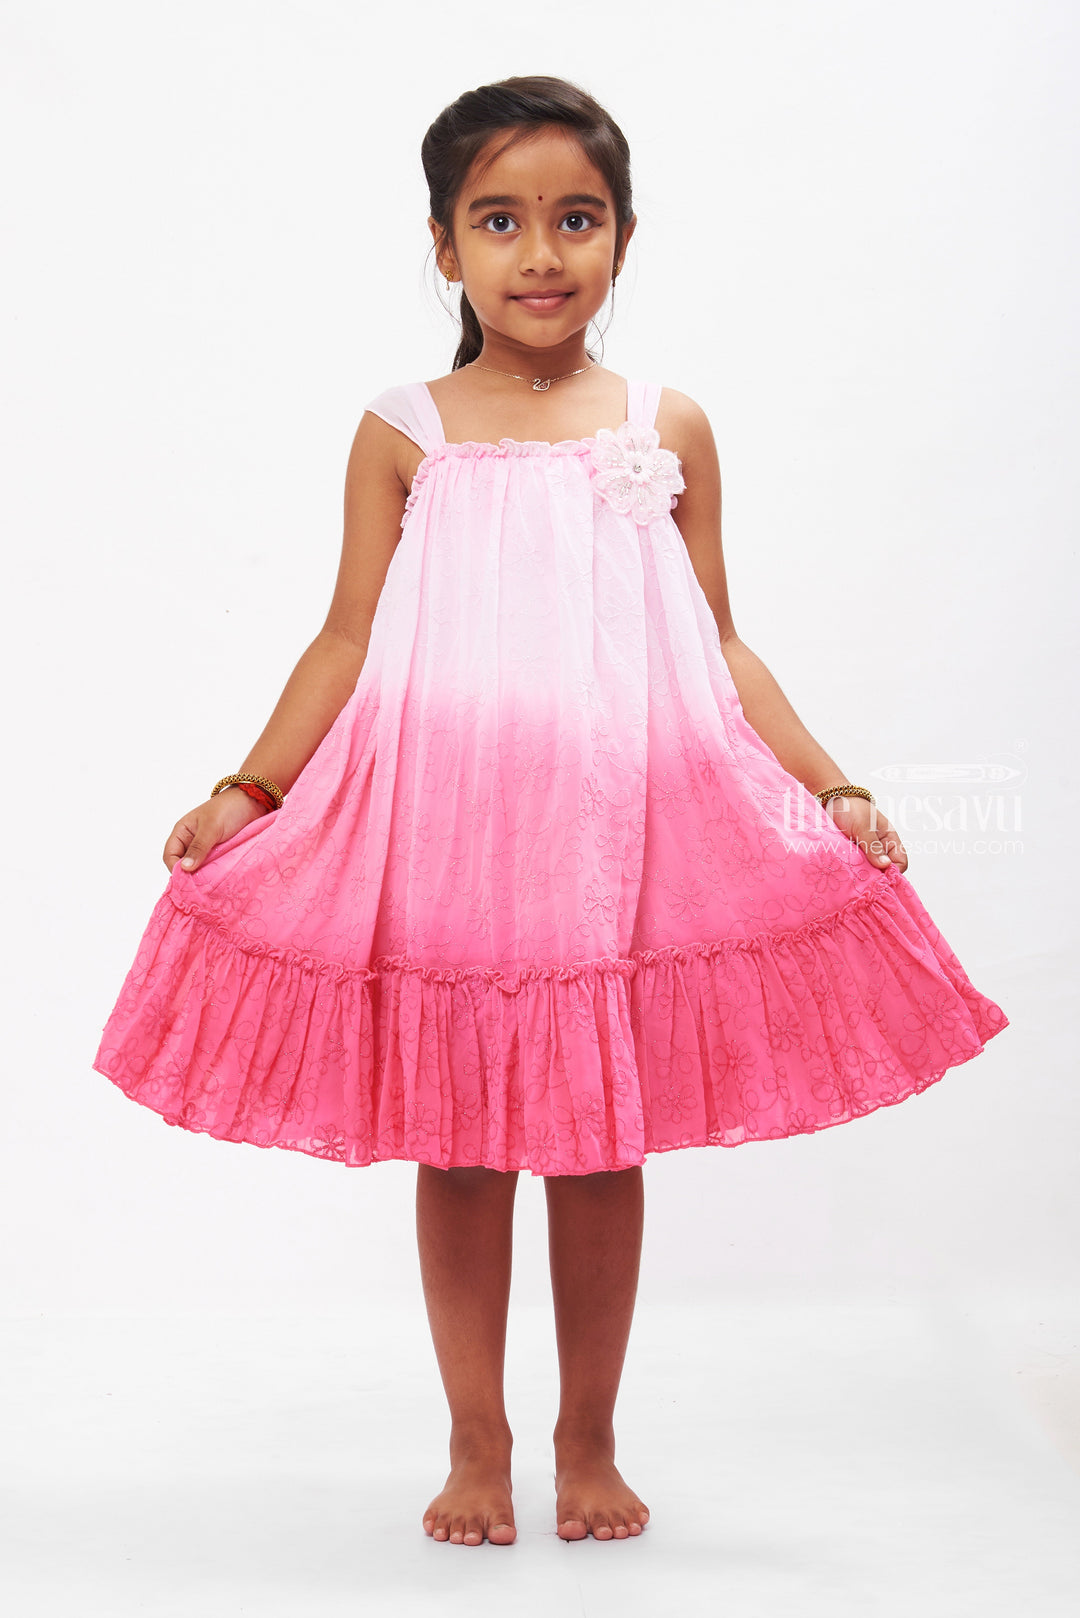 The Nesavu Girls Fancy Frock Girls Pink Princess Frock with Sparkling Tulle - Enchanted Evening Wear Nesavu Girls Pink Party Frock | Sparkly Tulle Dress for Kids | The Nesavu